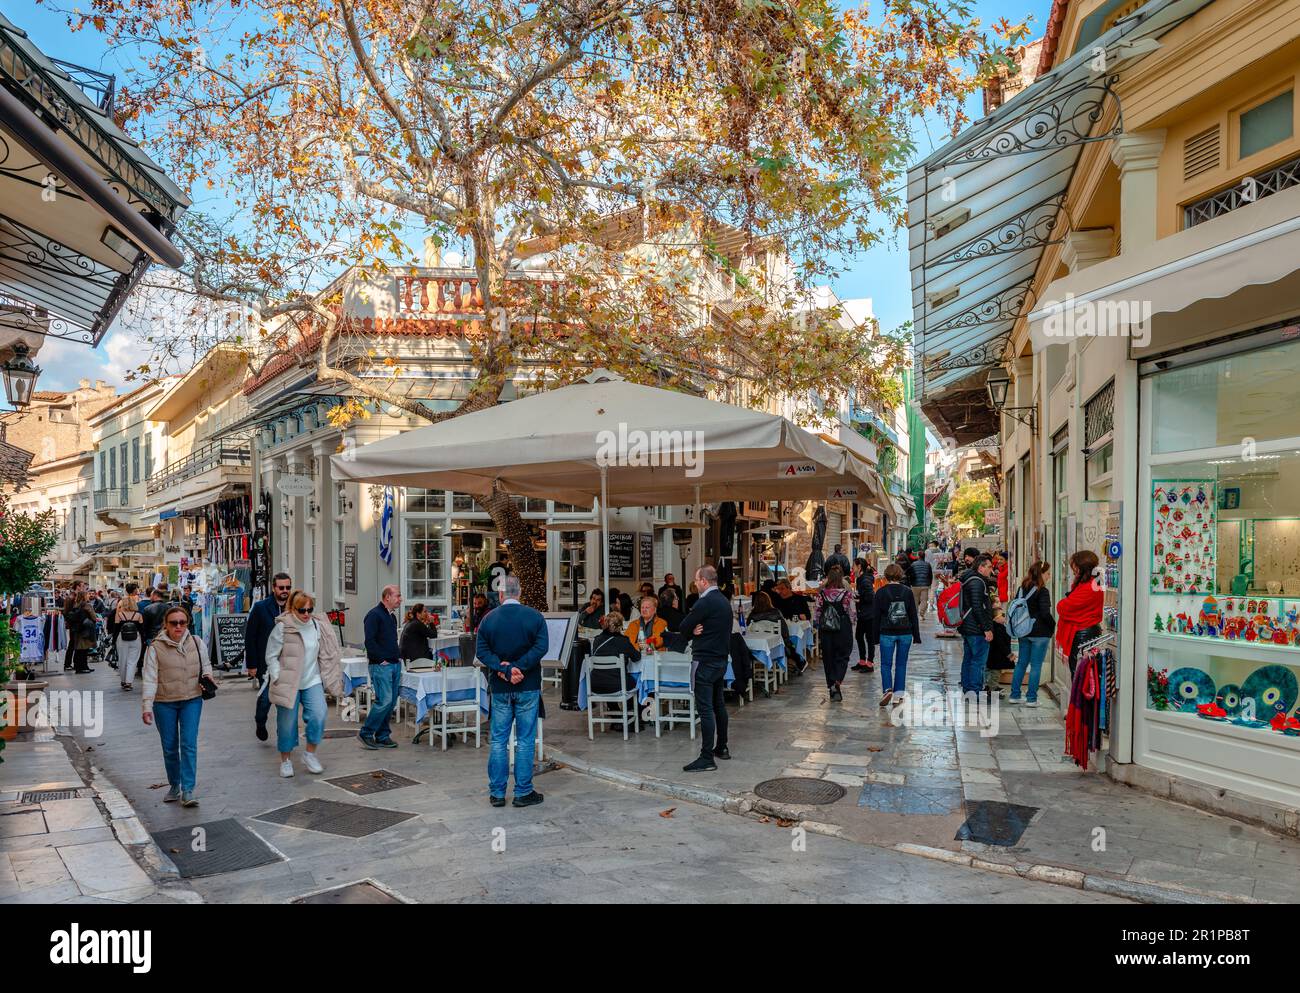 The junction of Adrianou St and Kidathinaion St, in the historic district of Plaka, in Athens, Greece. Stock Photo